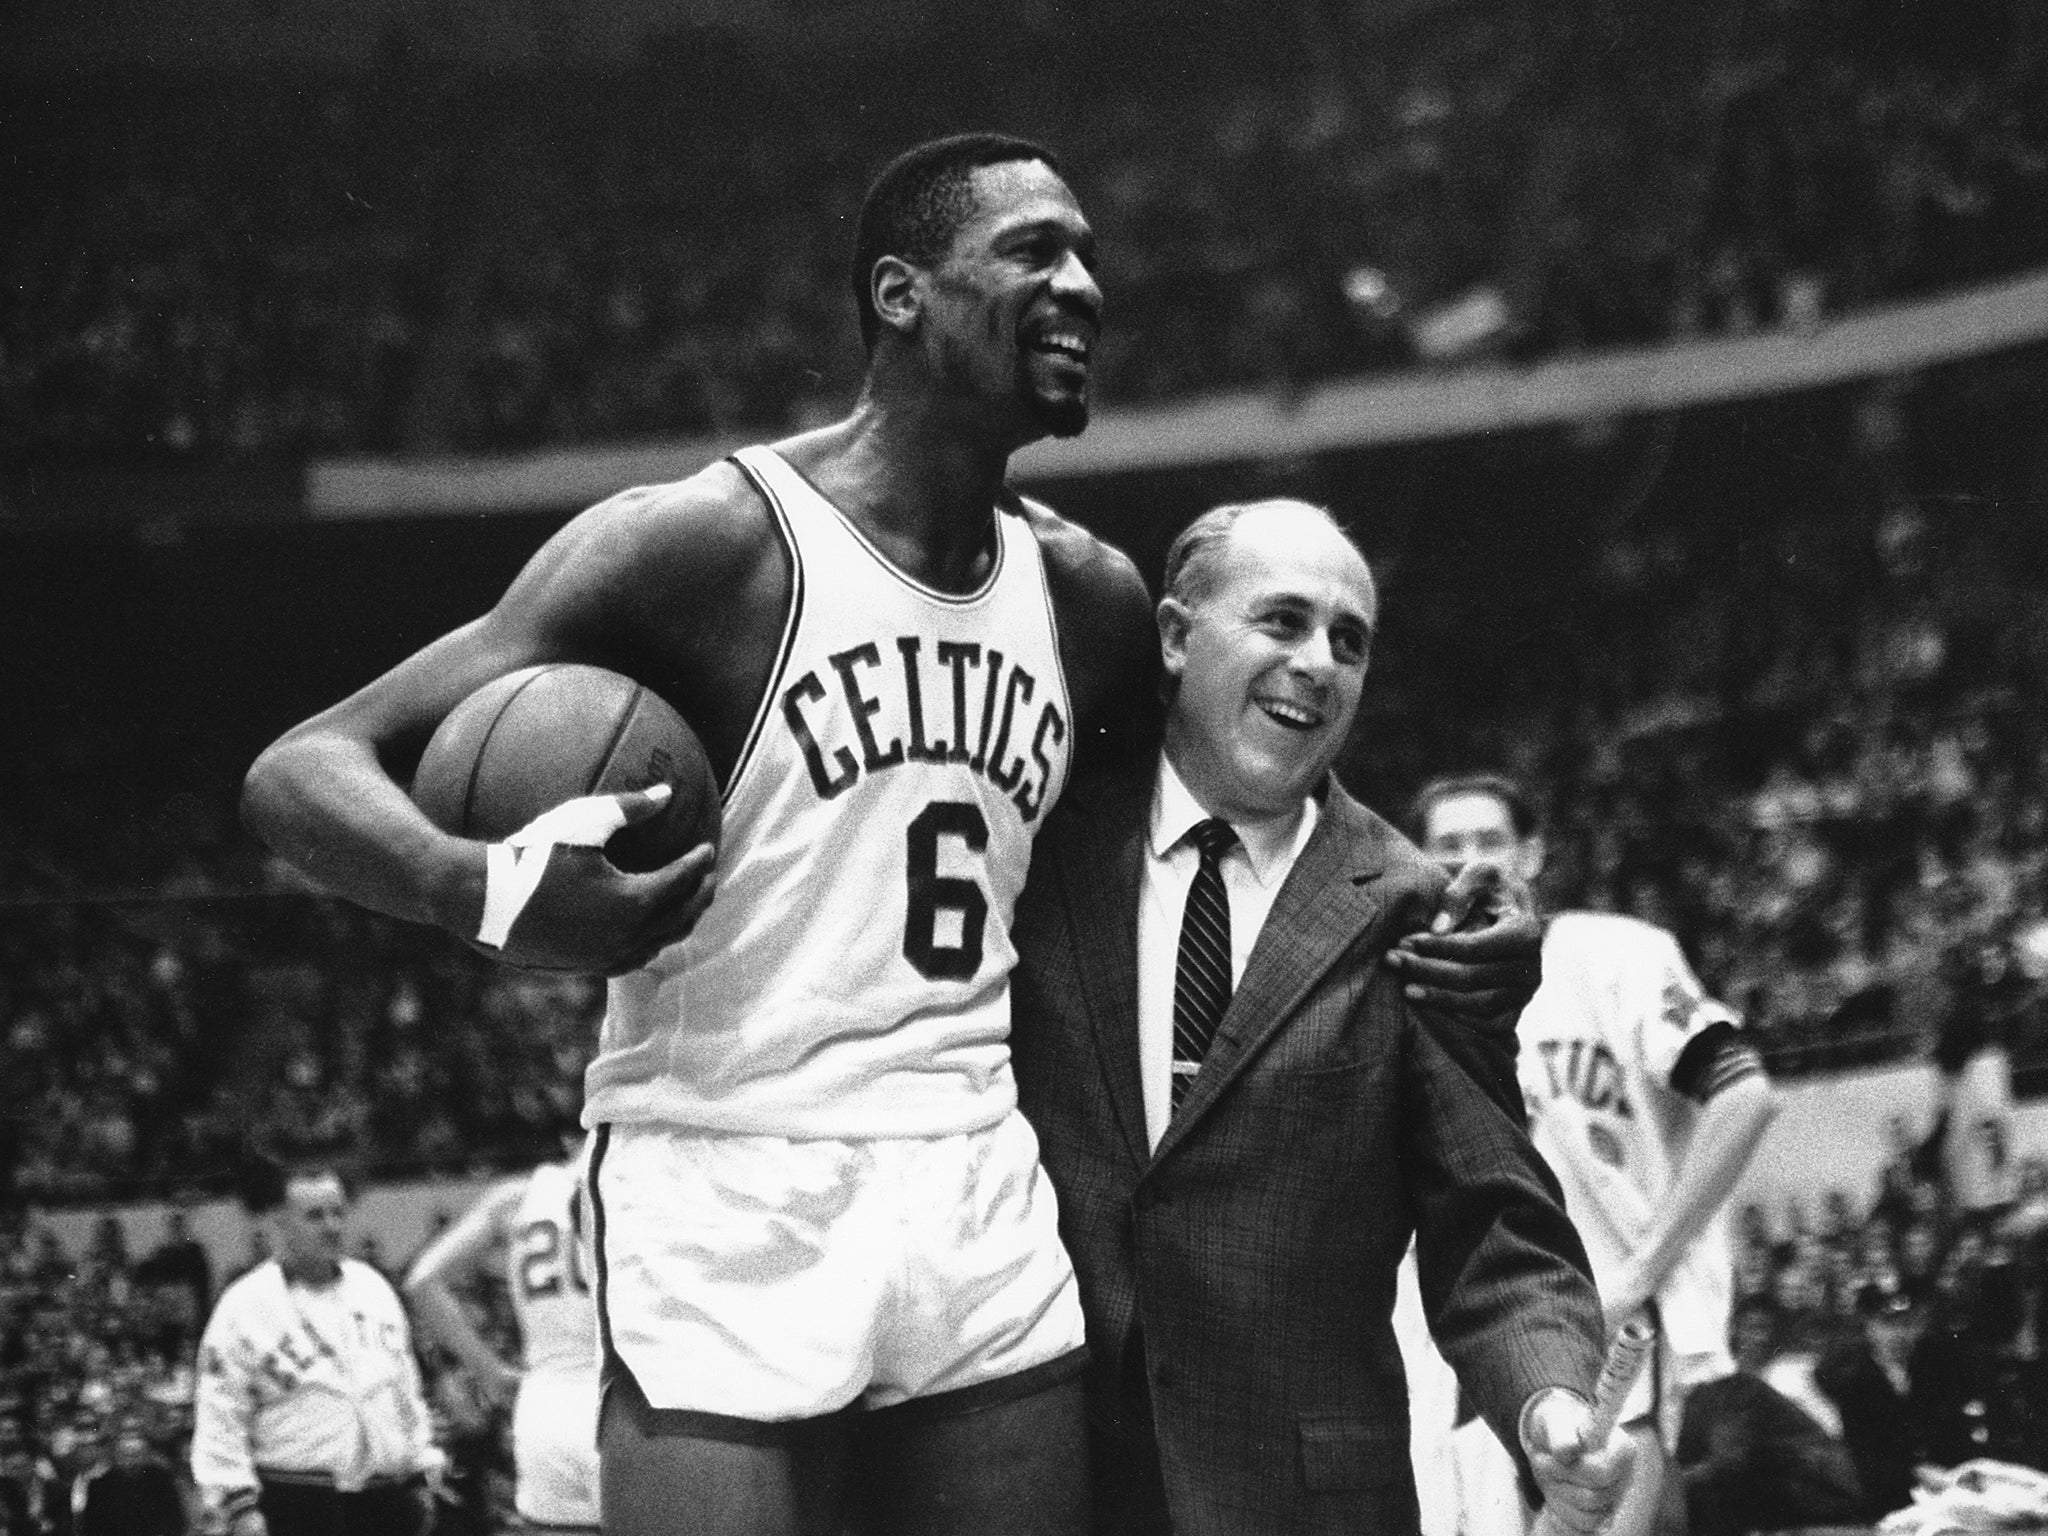 Russell is congratulated by coach Arnold ‘Red’ Auerbach after scoring his 10,000th point in the game against the Baltimore Bullets in Boston Garden on 12 December 1964